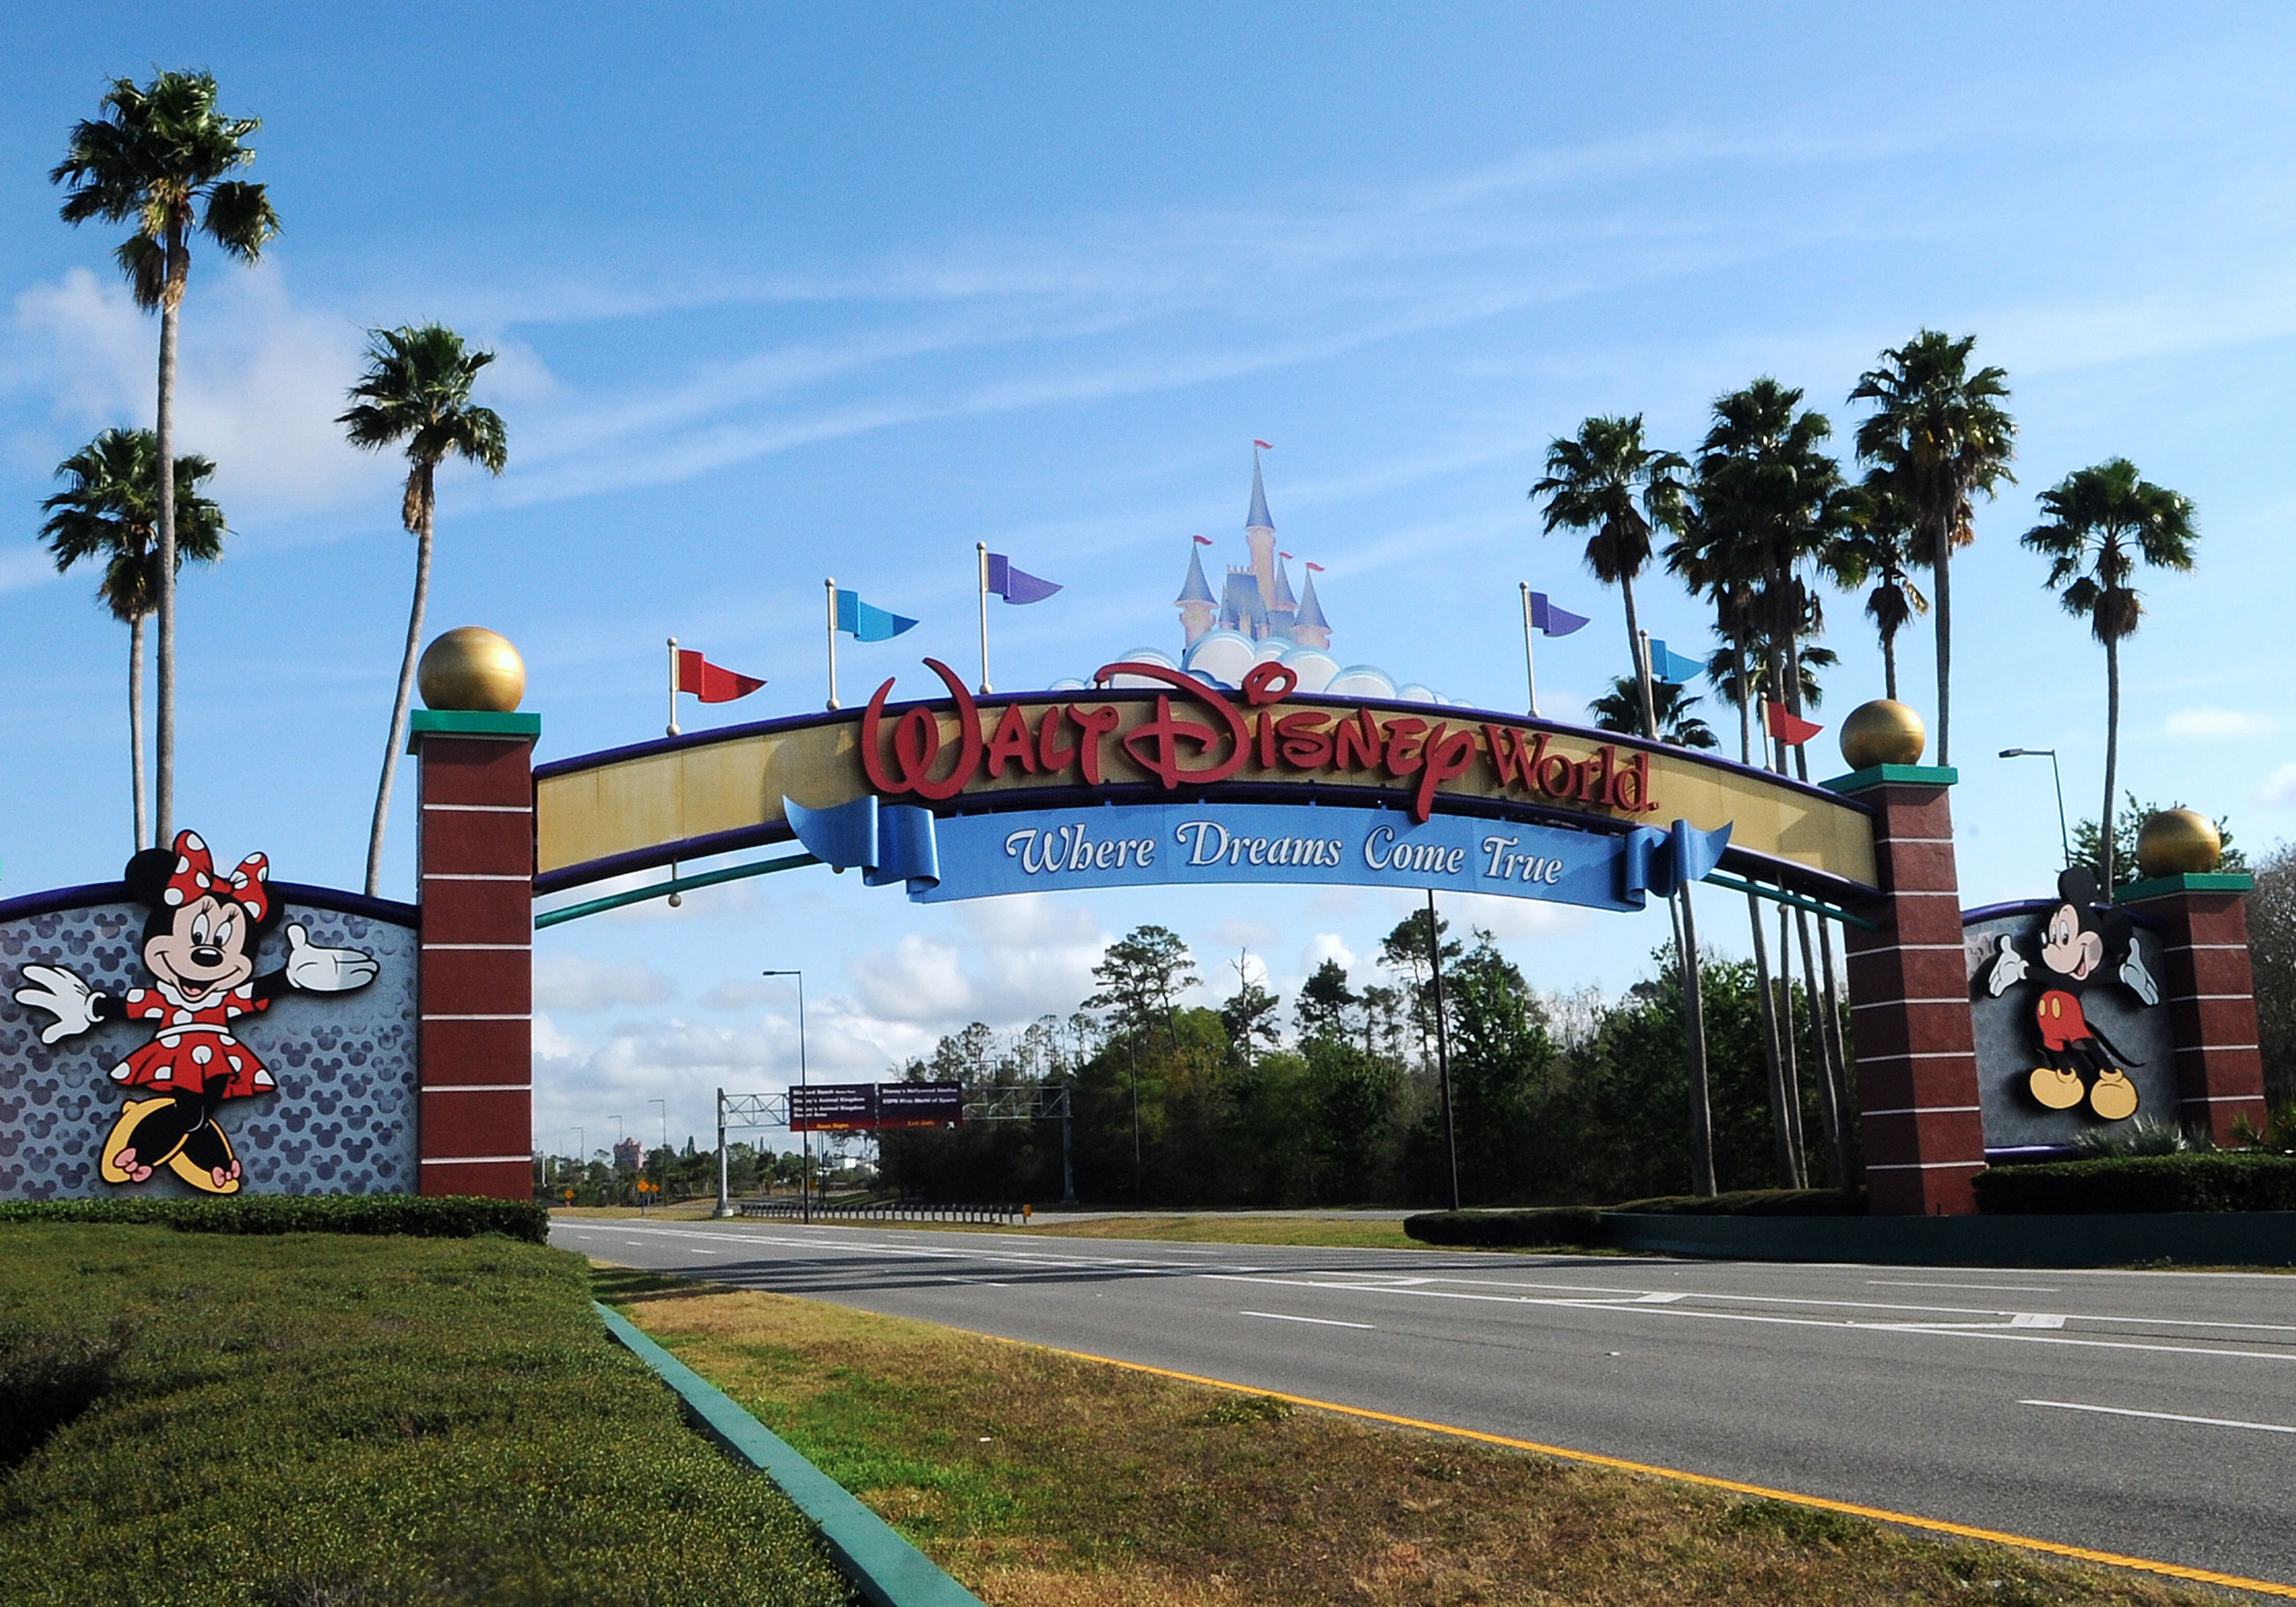 The entrance to Disney World in Orlando on March 16.